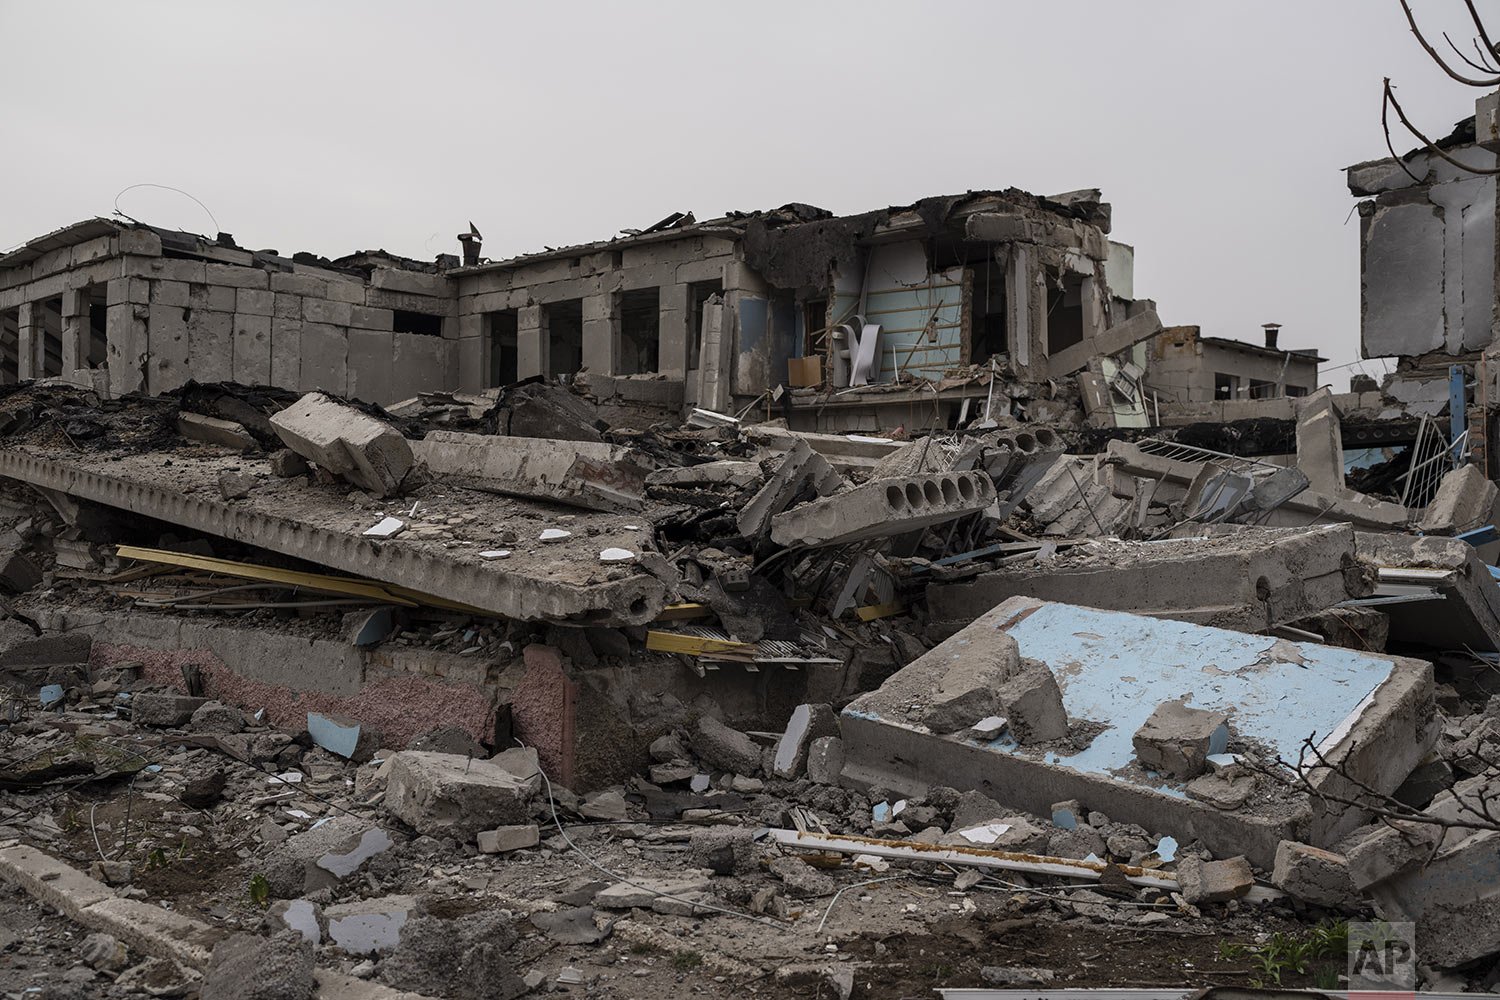  A damaged school lays in ruins following a Russian mid-March attack, on the outskirts of Mykolaiv, Ukraine, Friday, April 1, 2022. (AP Photo/Petros Giannakouris) 